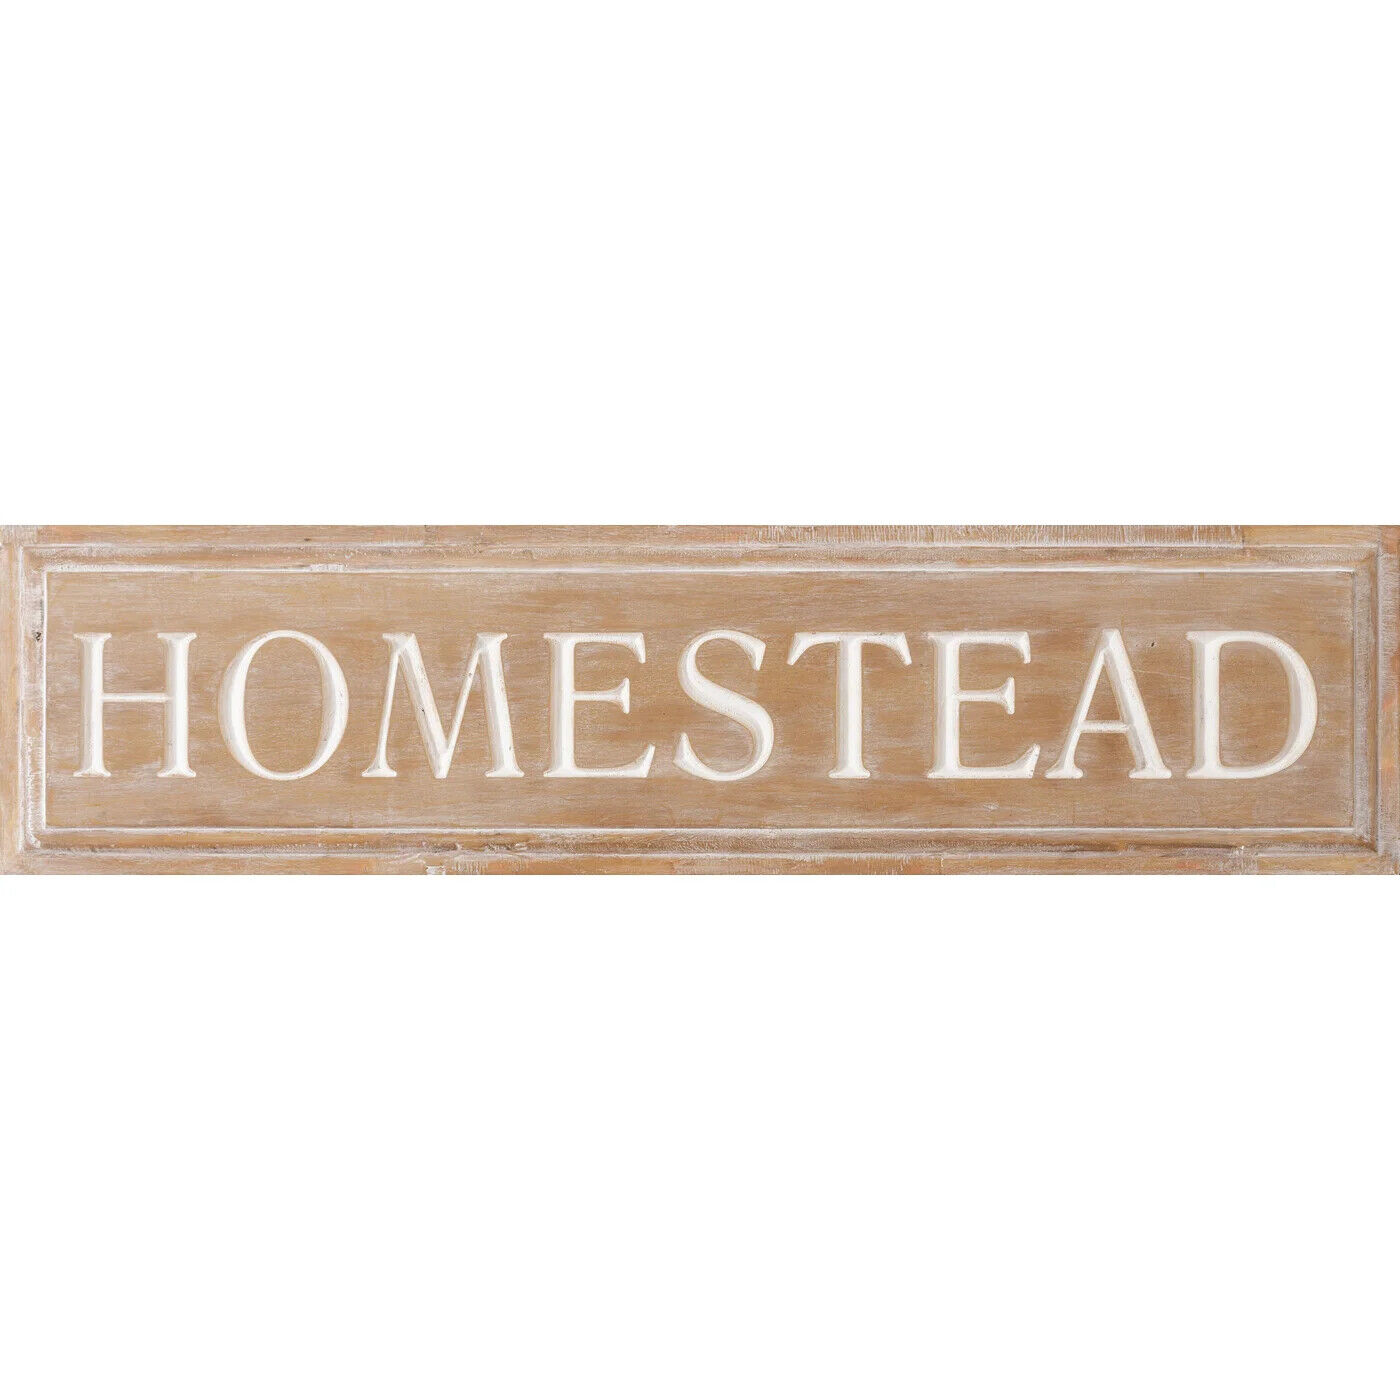 New Cottage Farmhouse Whitewashed Tan HOMESTEAD SIGN Large Wall Hanging 40\